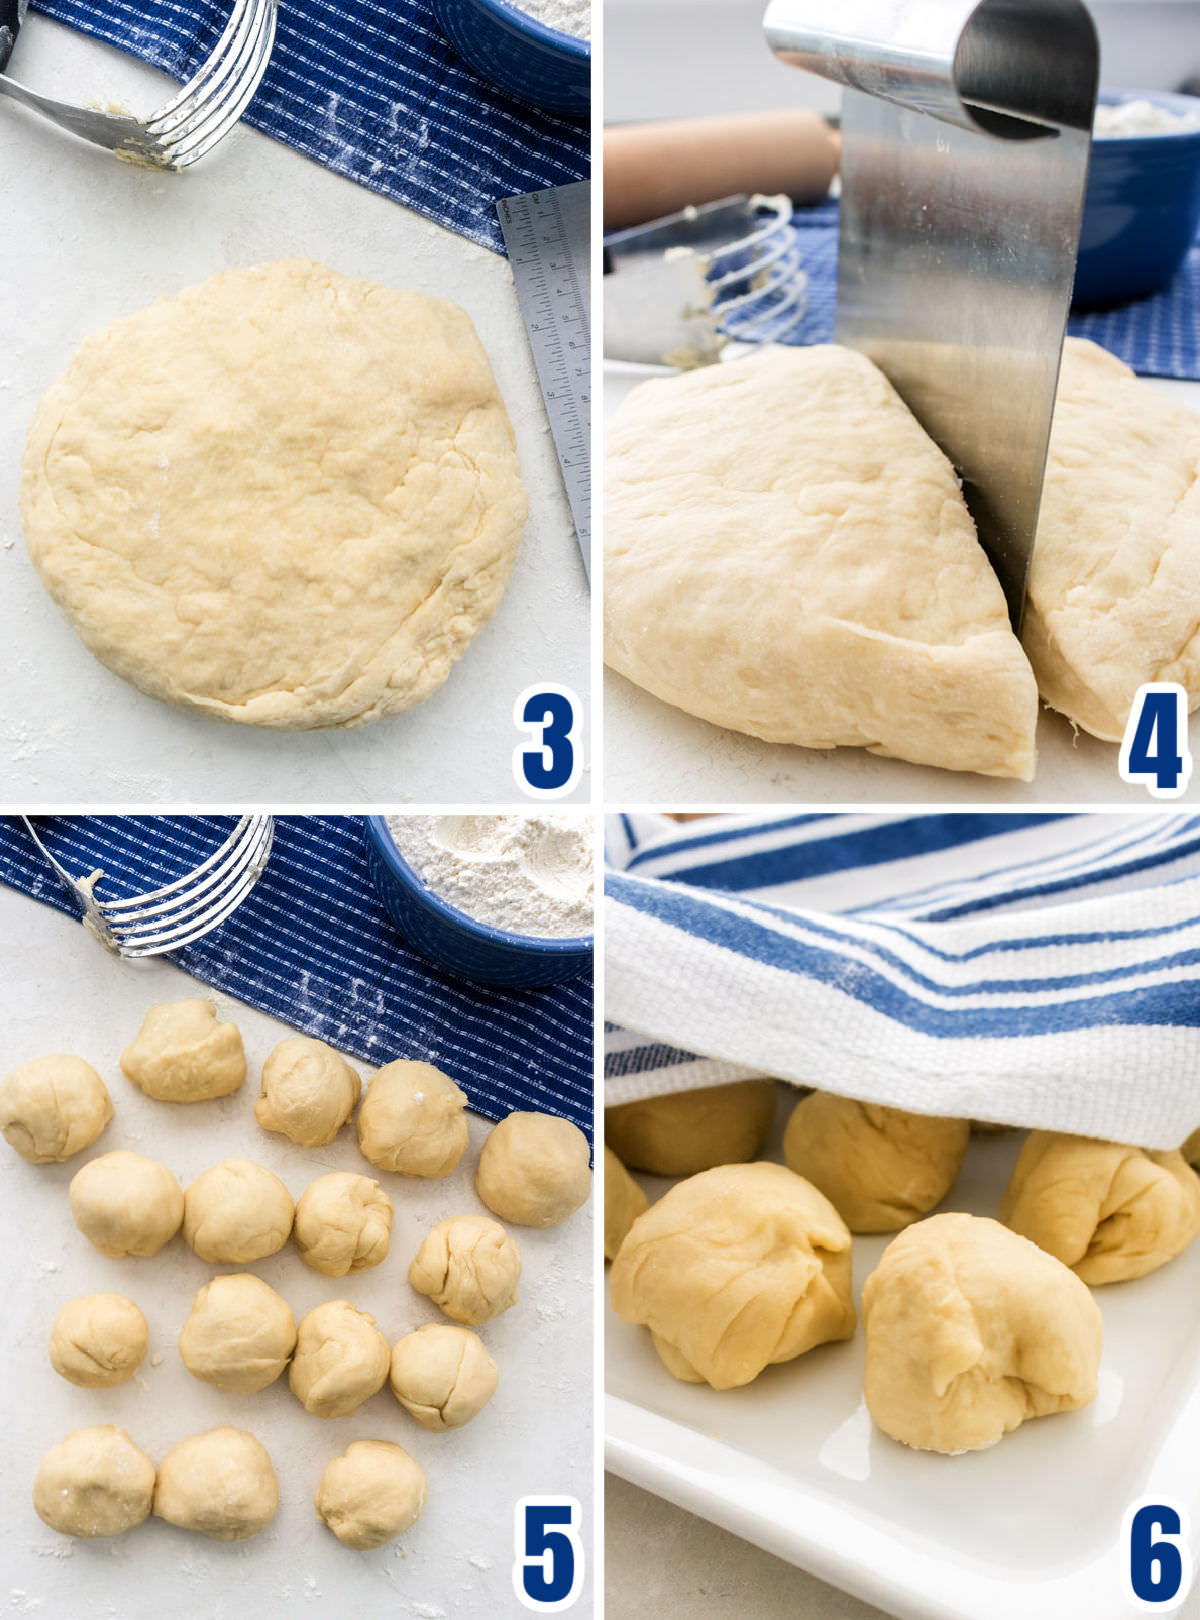 Collage image showing how to separate the tortilla dough into pieces ready for rolling out.